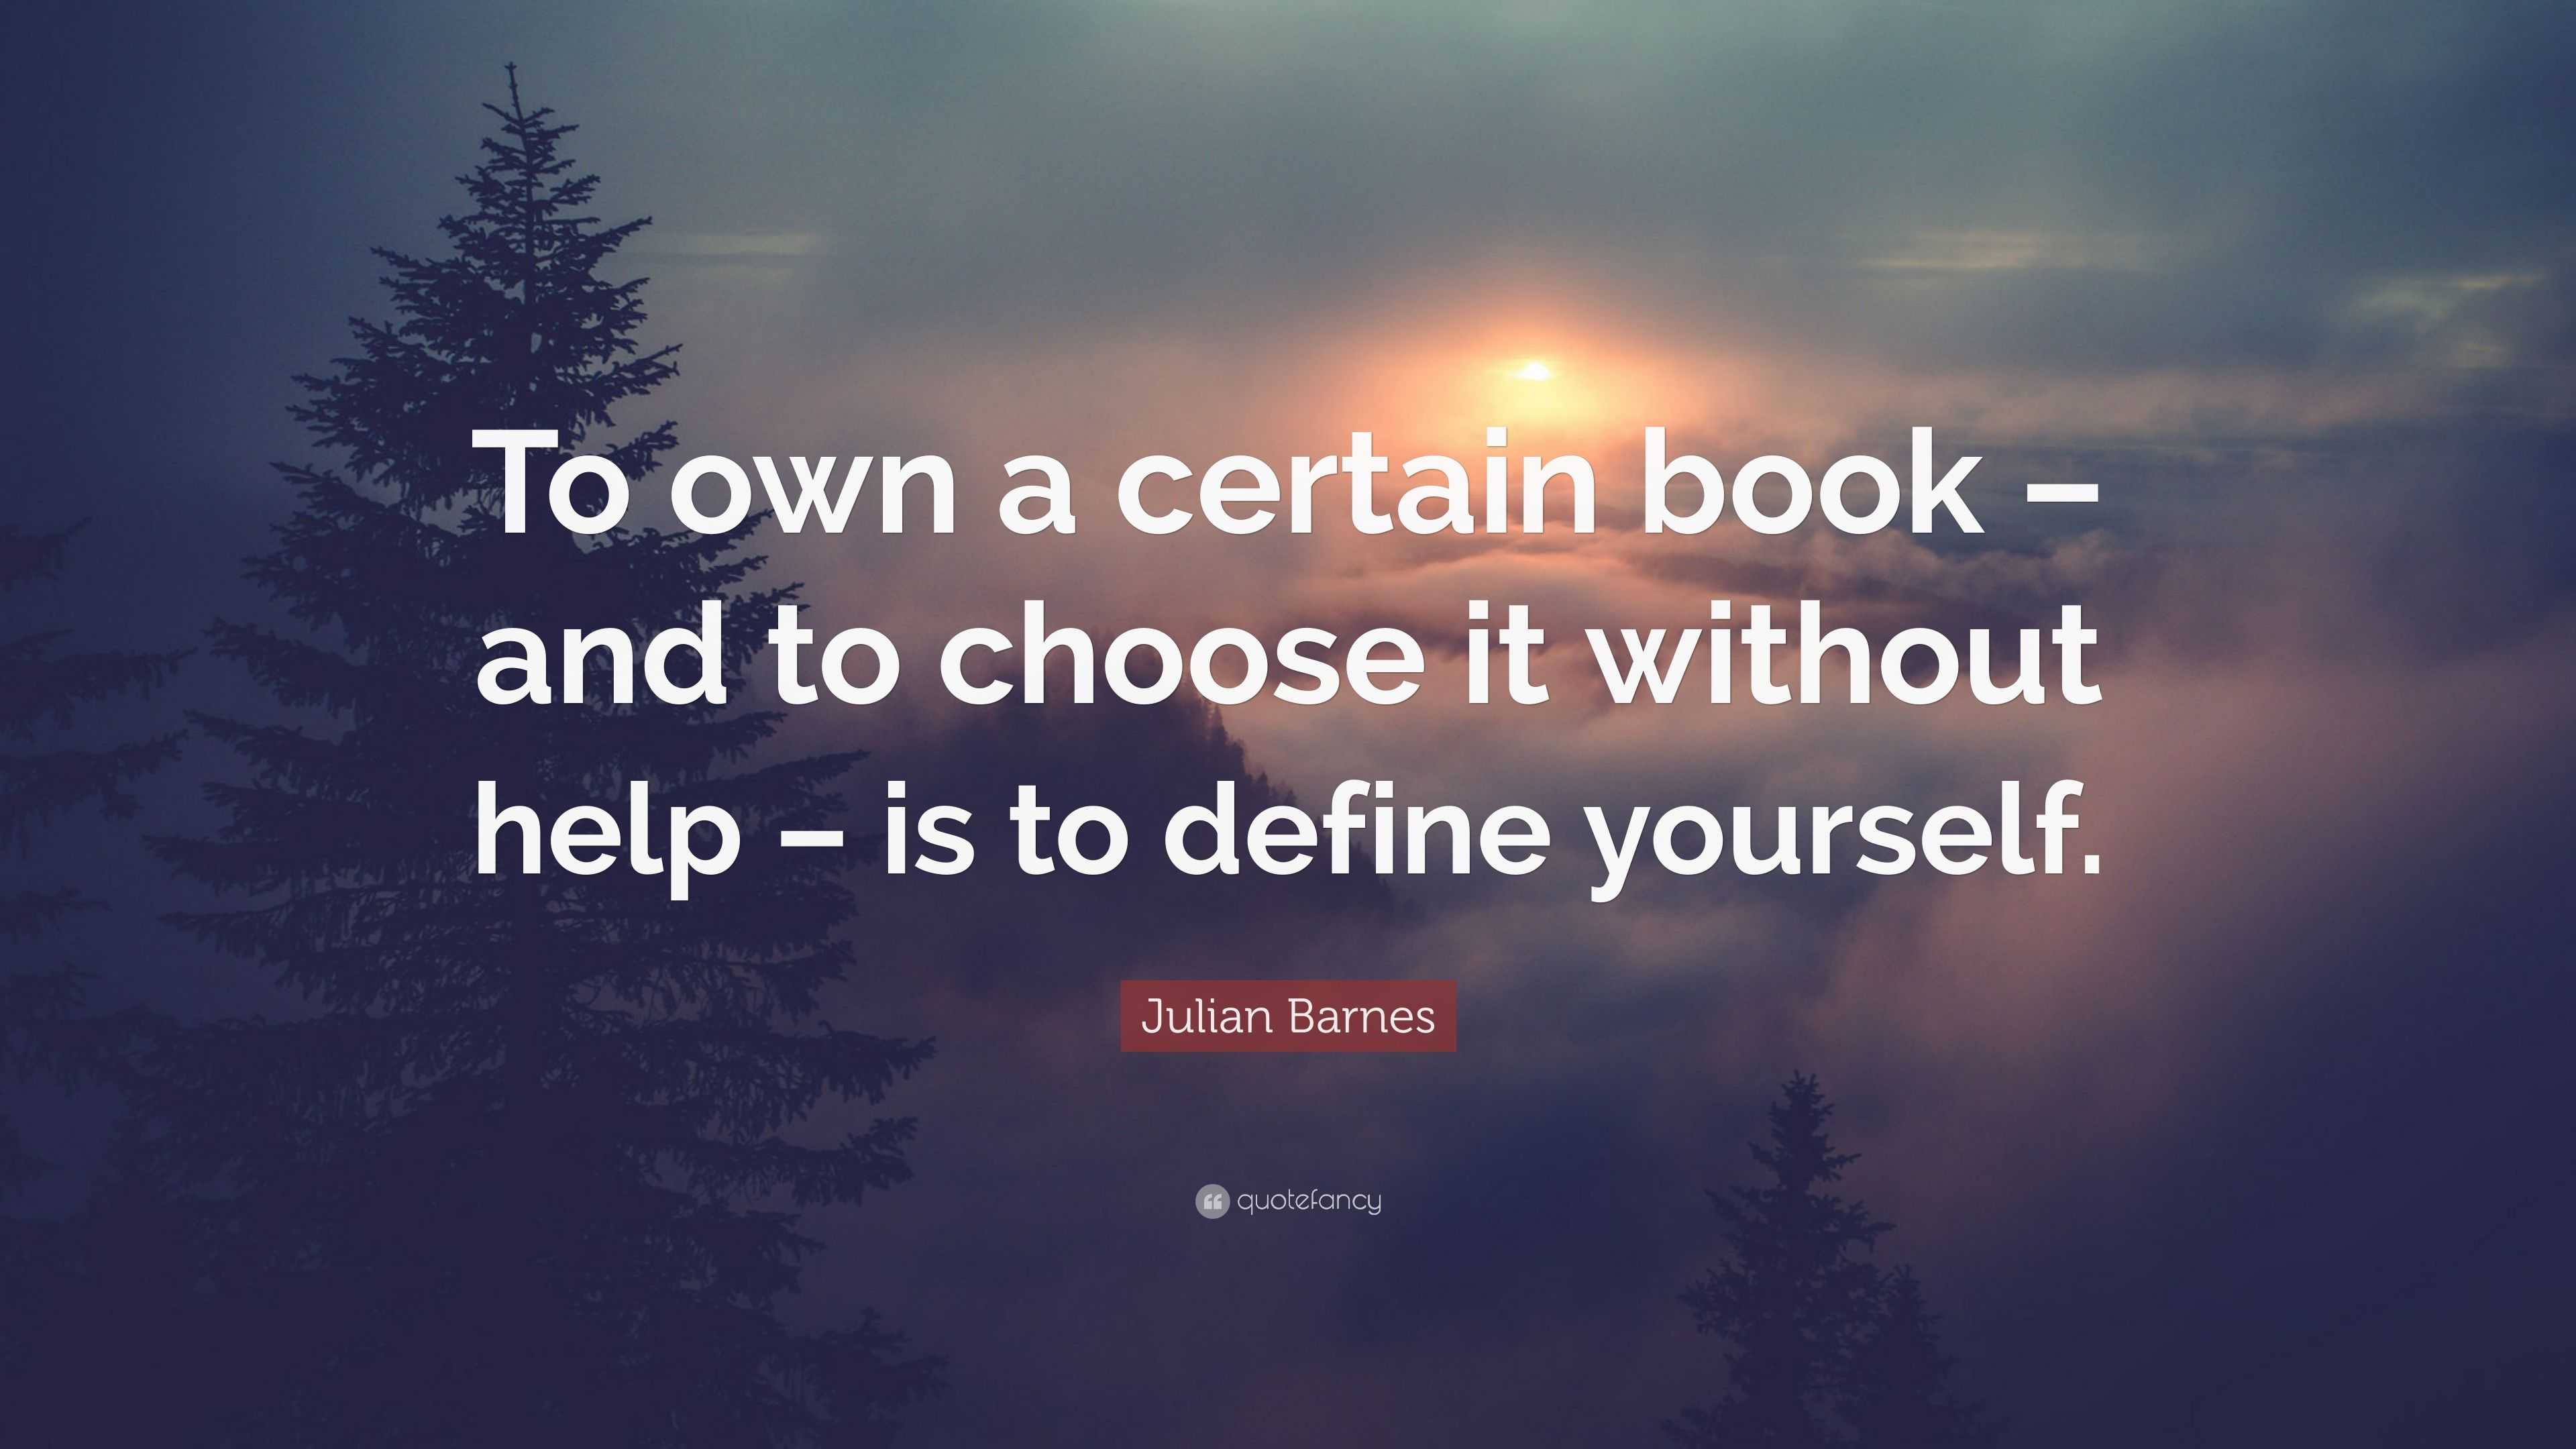 Julian Barnes Quote: “To own a certain book – and to choose it without ...